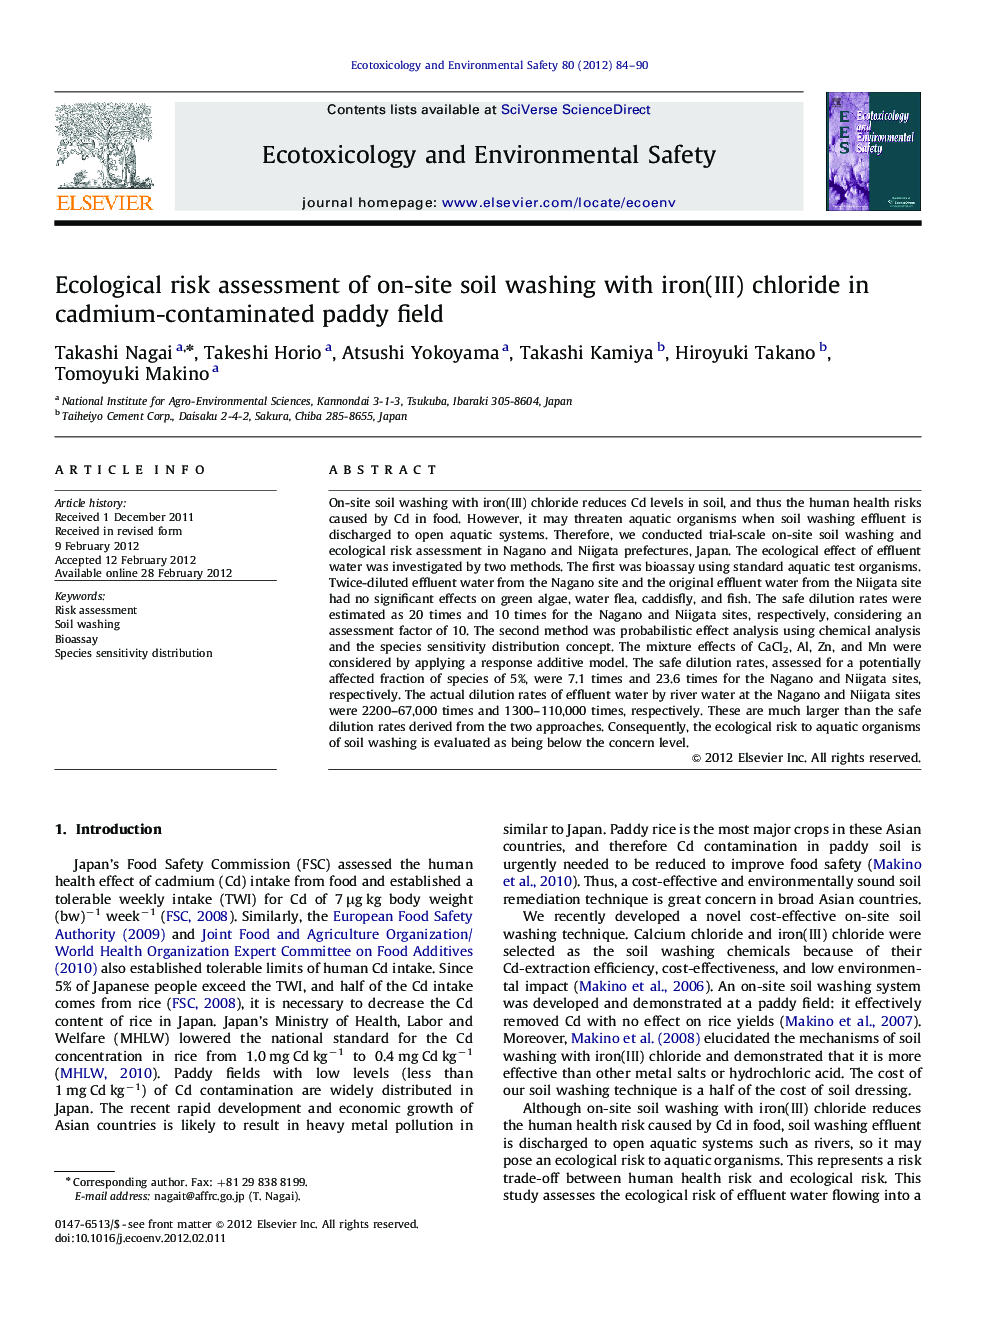 Ecological risk assessment of on-site soil washing with iron(III) chloride in cadmium-contaminated paddy field